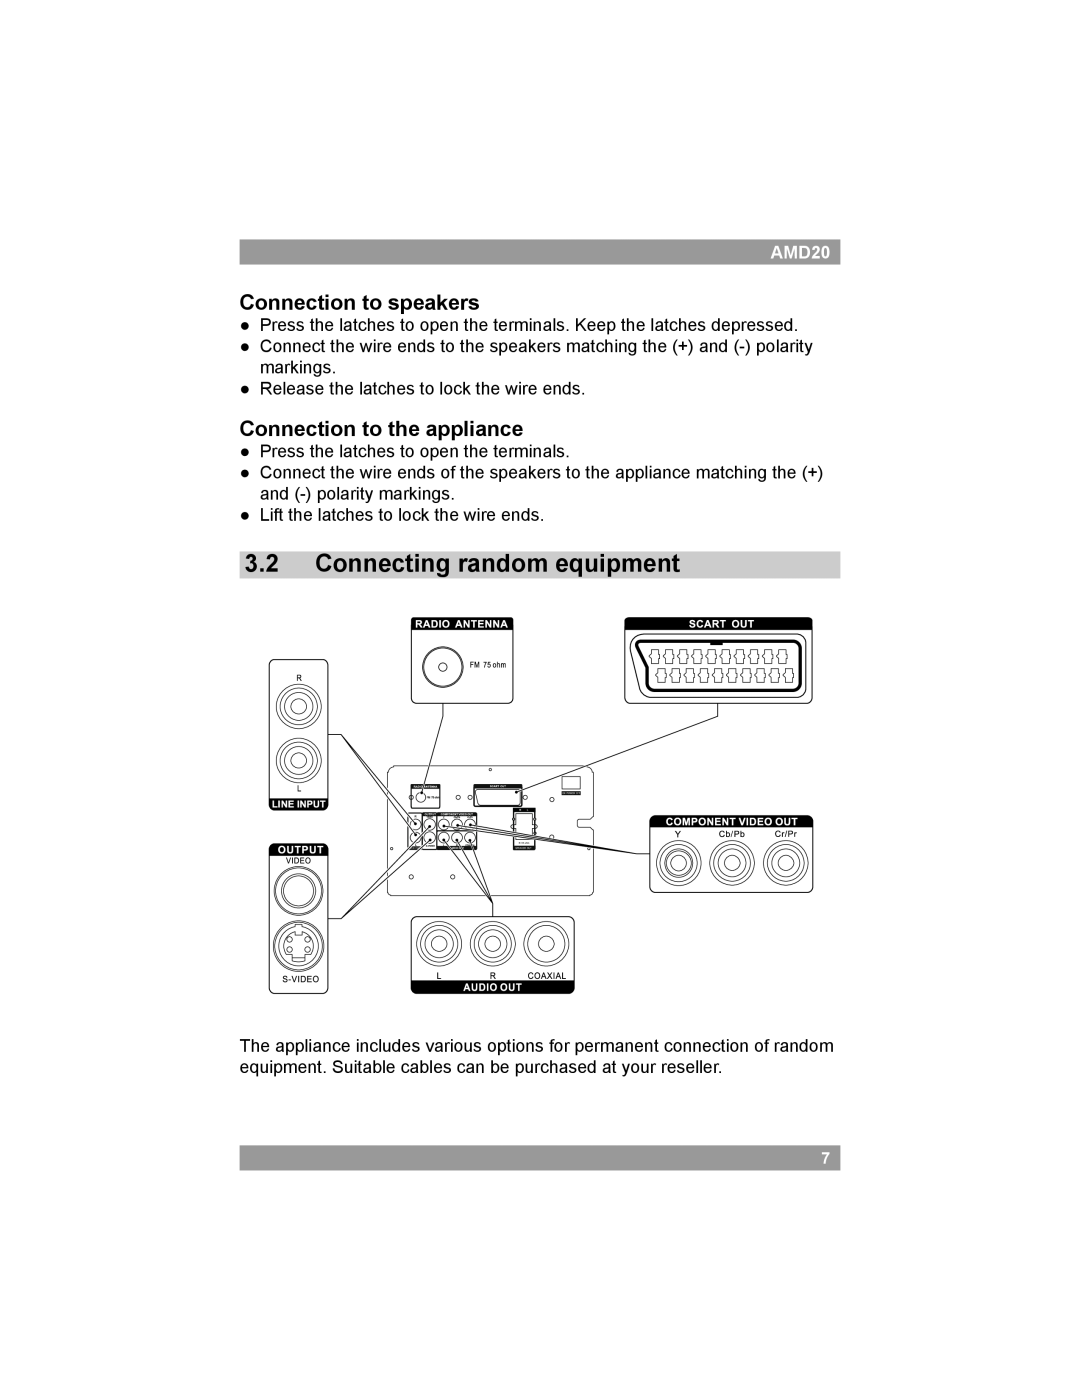 Akai AMD20 manual 3.2Connecting random equipment, Connection to speakers, Connection to the appliance 